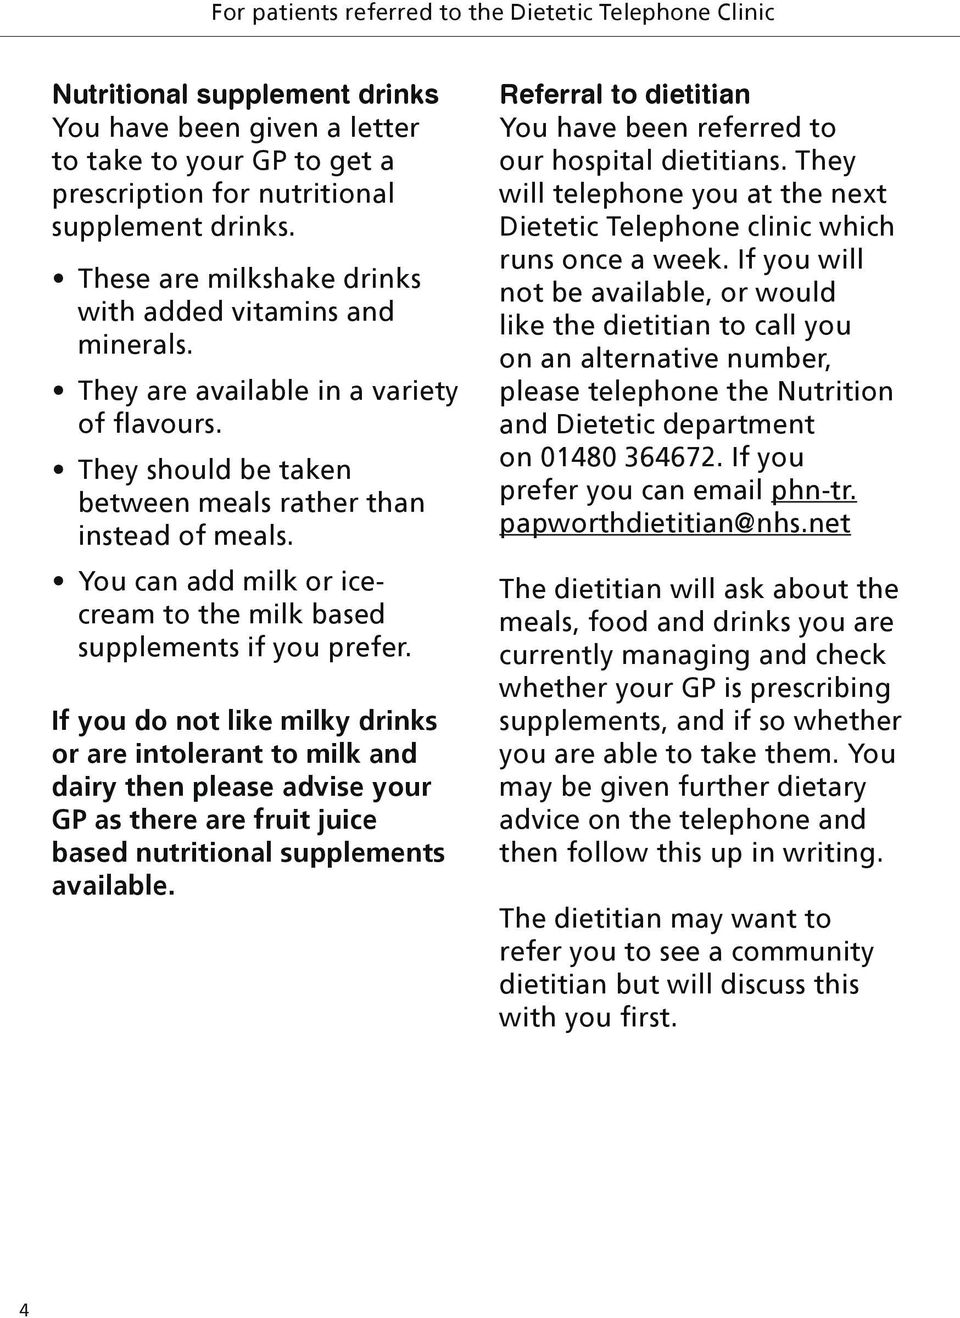 If you do not like milky drinks or are intolerant to milk and dairy then please advise your GP as there are fruit juice based nutritional supplements available.